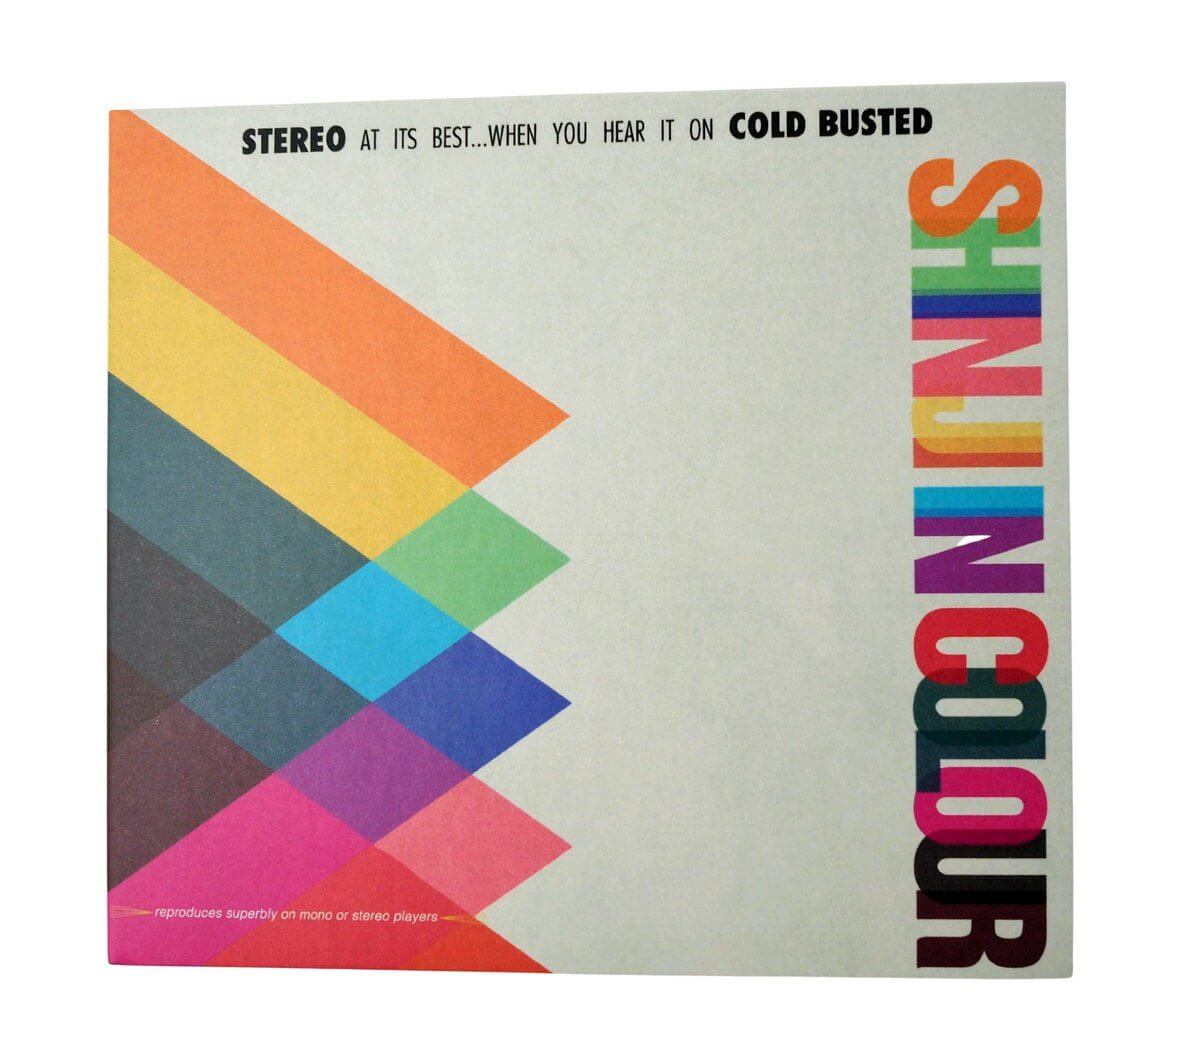 Shinji - In Colour - Limited Edition Compact Disc - Cold Busted